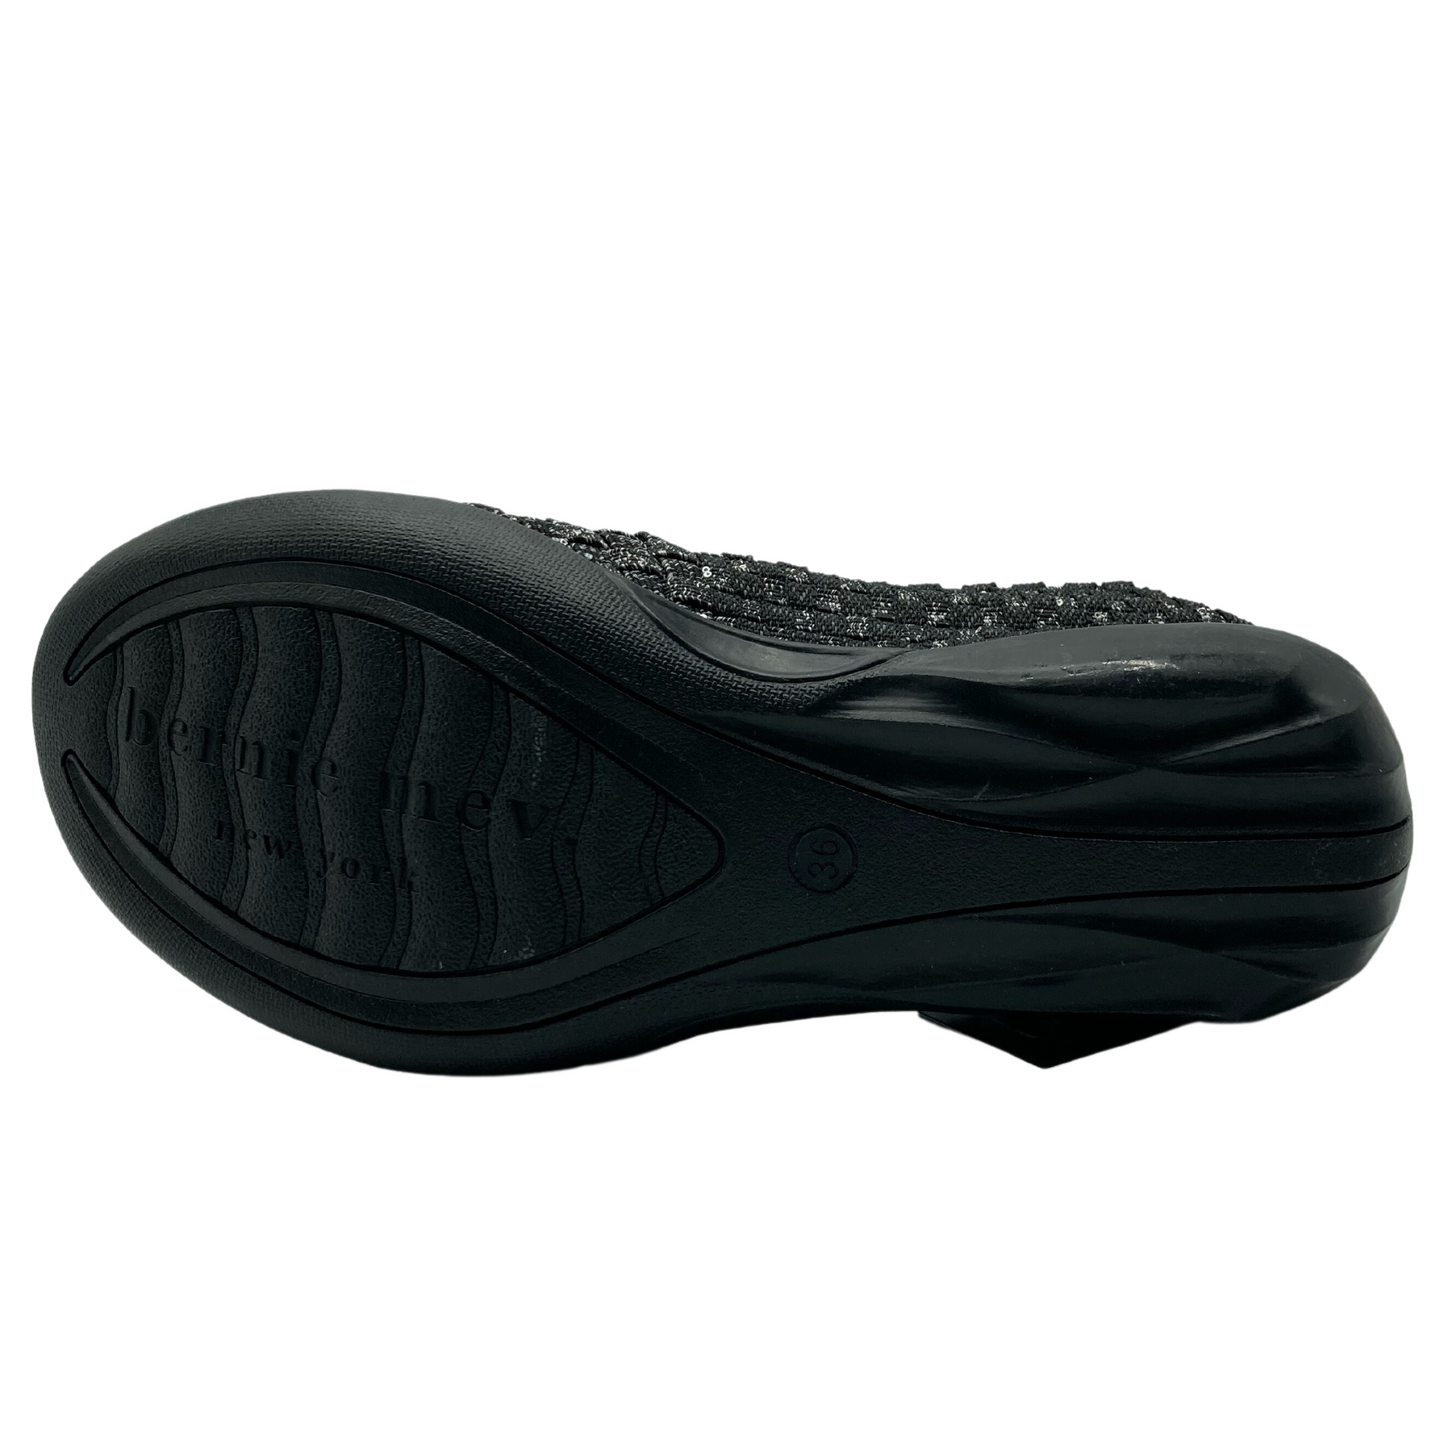 Bottom view of grey flat shoe with black outsole